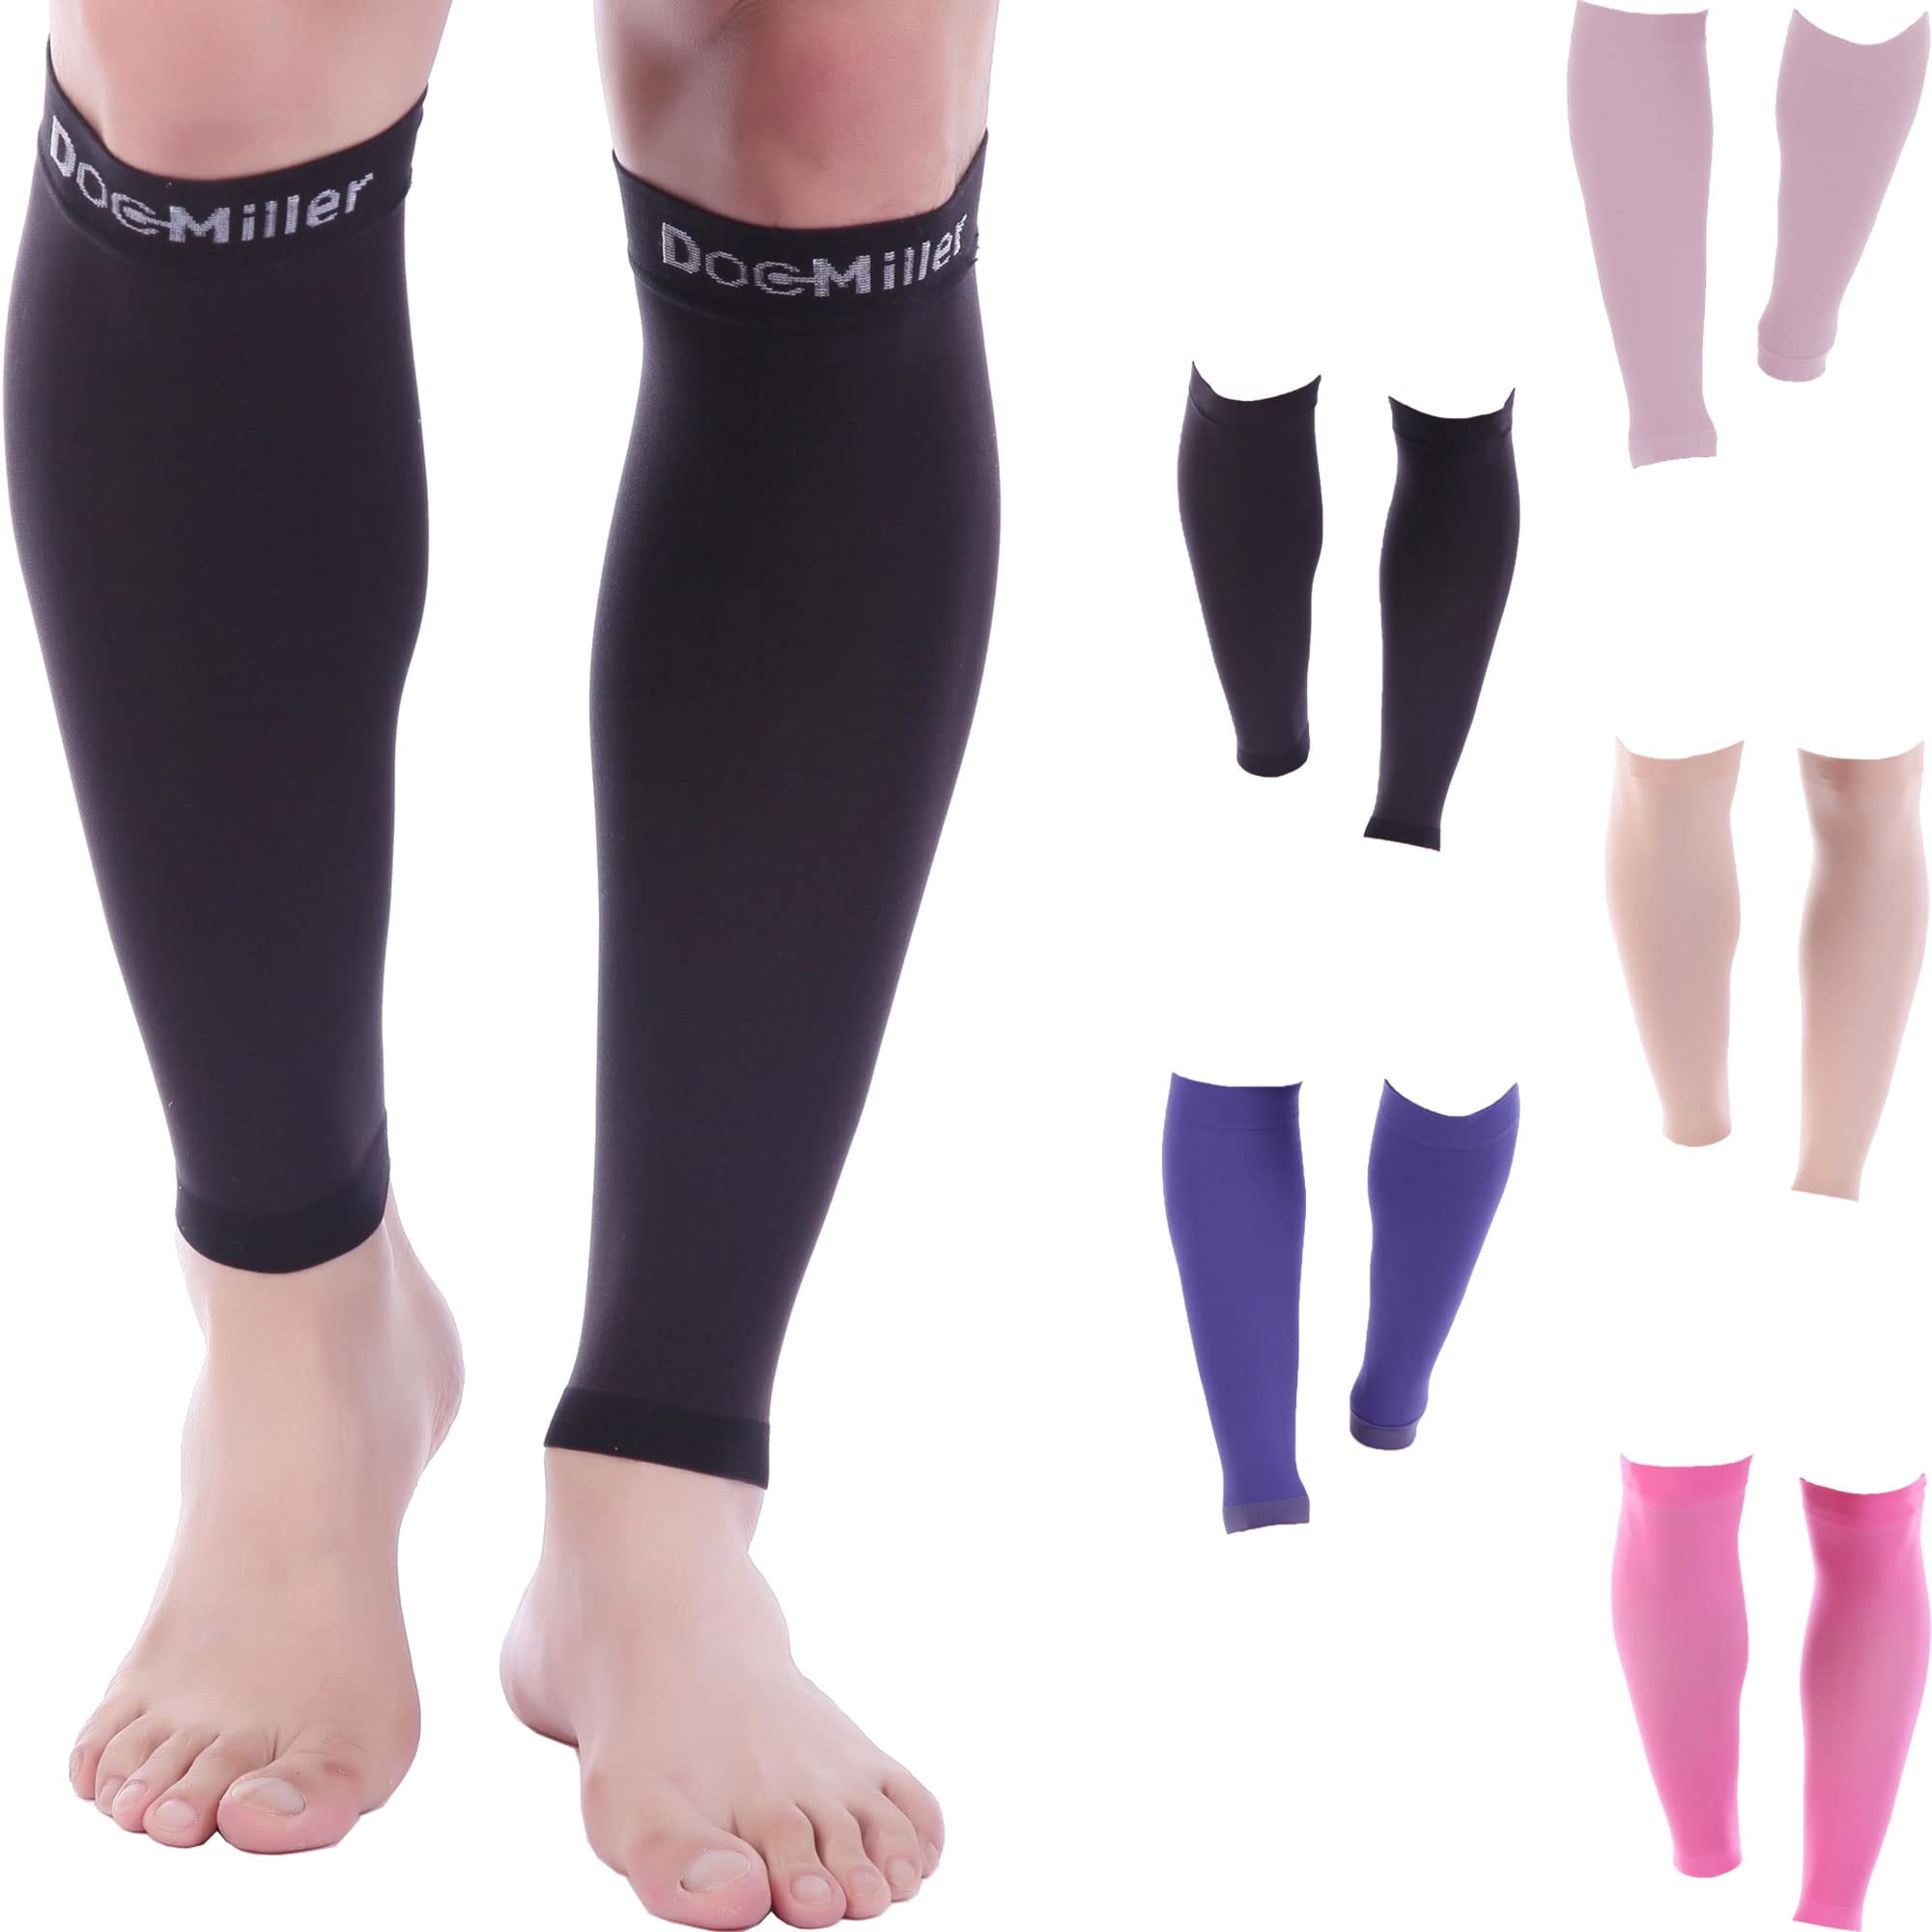 Thigh Compression Sleeves PINK by Doc Miller